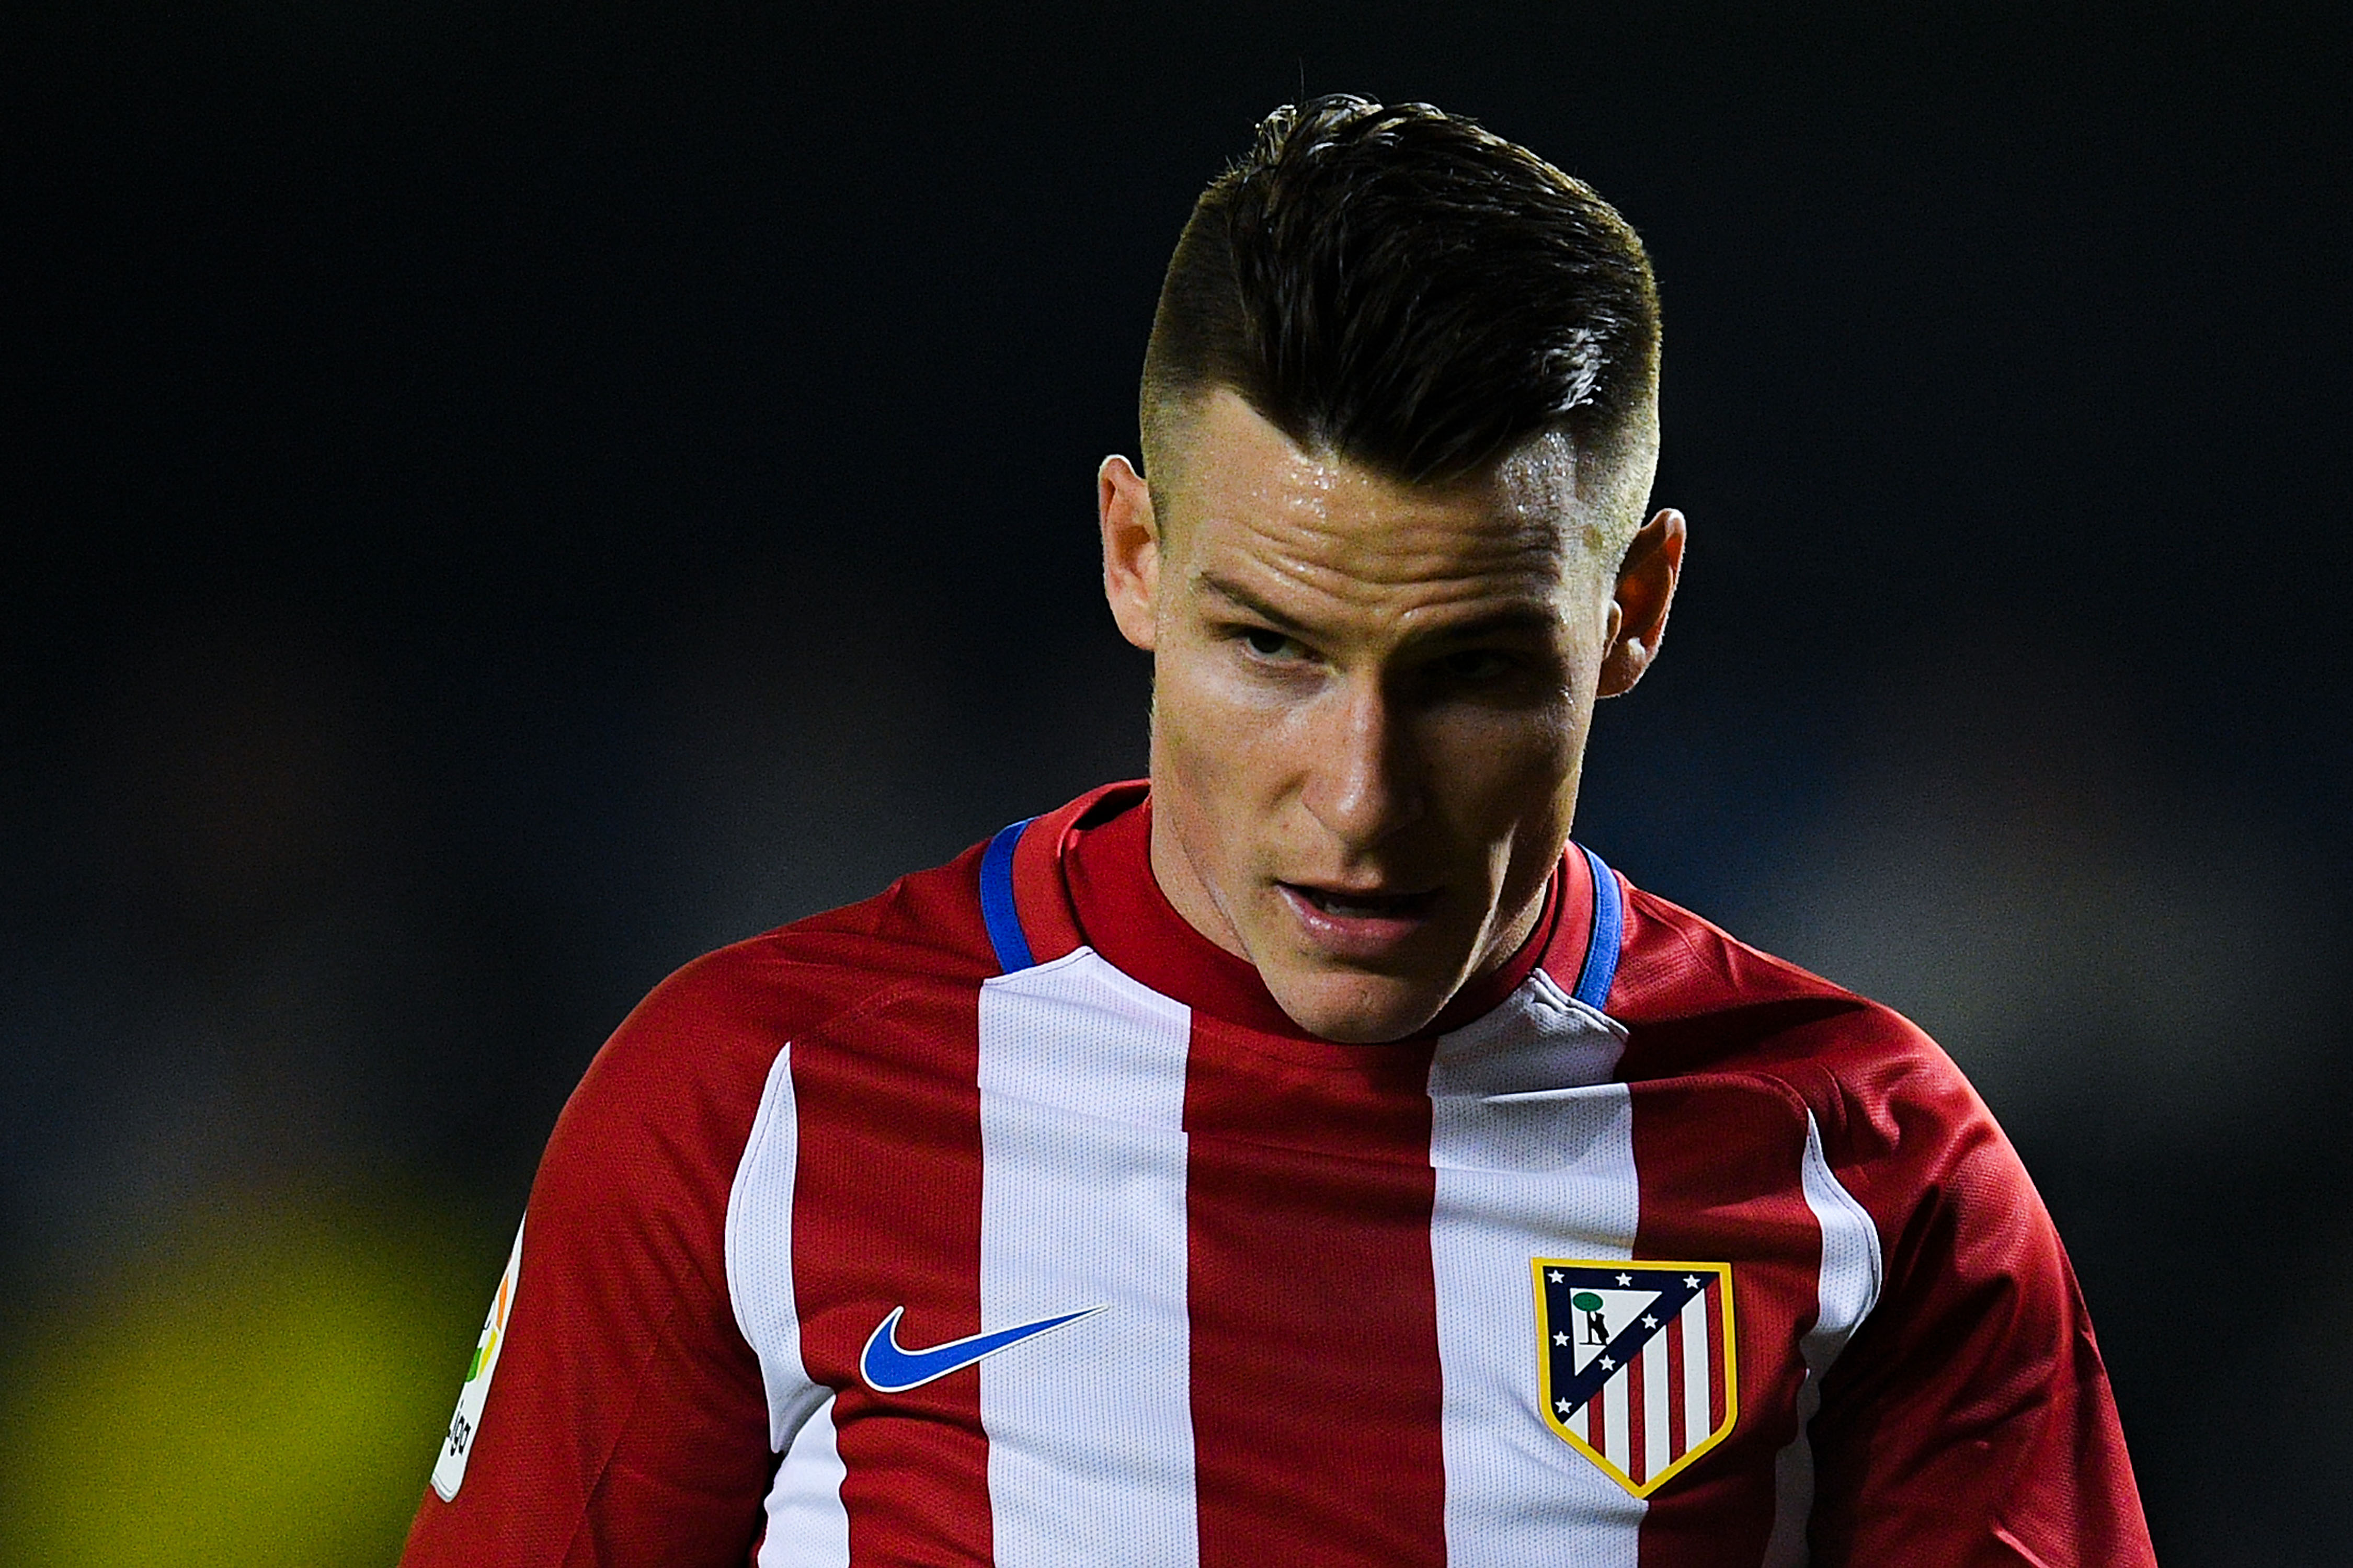 VILLARREAL, SPAIN - DECEMBER 12:  Kevin Gameiro of Club Atletico de Madrid looks on during the La Liga match between Villarreal CF and Club Atletico de Madrid at El Madrigal stadium on December 12, 2016 in Villarreal, Spain.  (Photo by David Ramos/Getty Images)